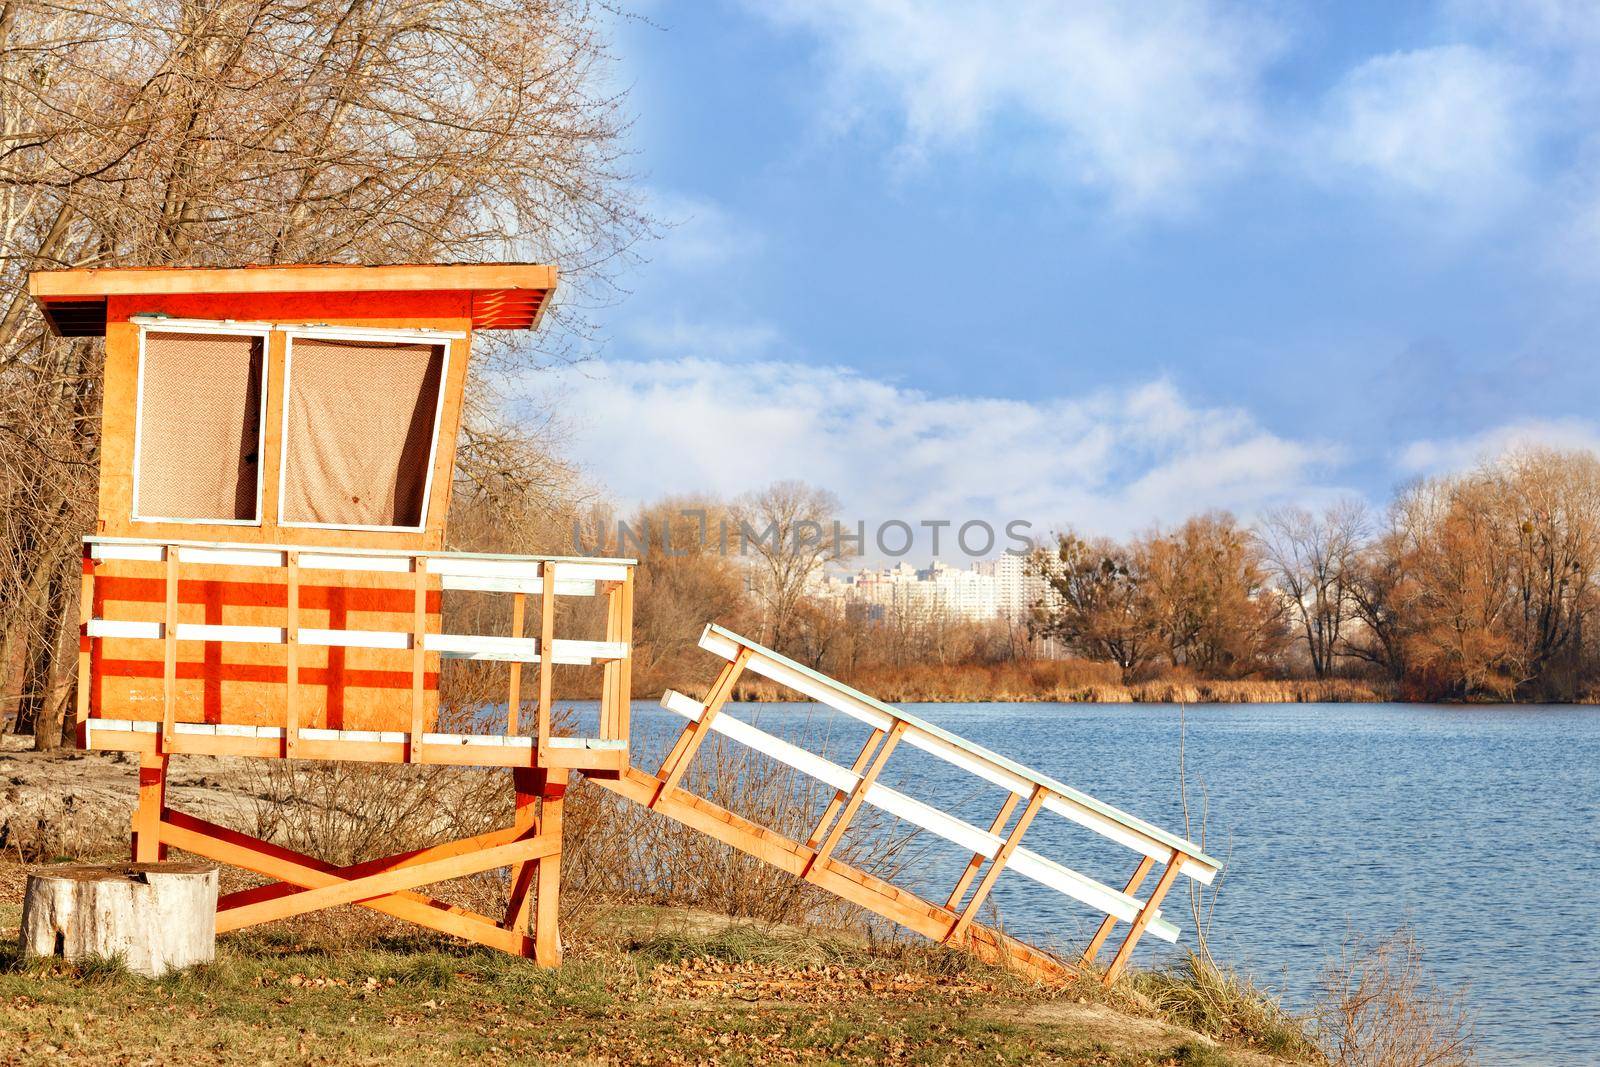 On the bank of the river with bare autumn bushes without leaves stands a lonely wooden house of lifeguards and is illuminated by the rays of the bright autumn sun. by Sergii